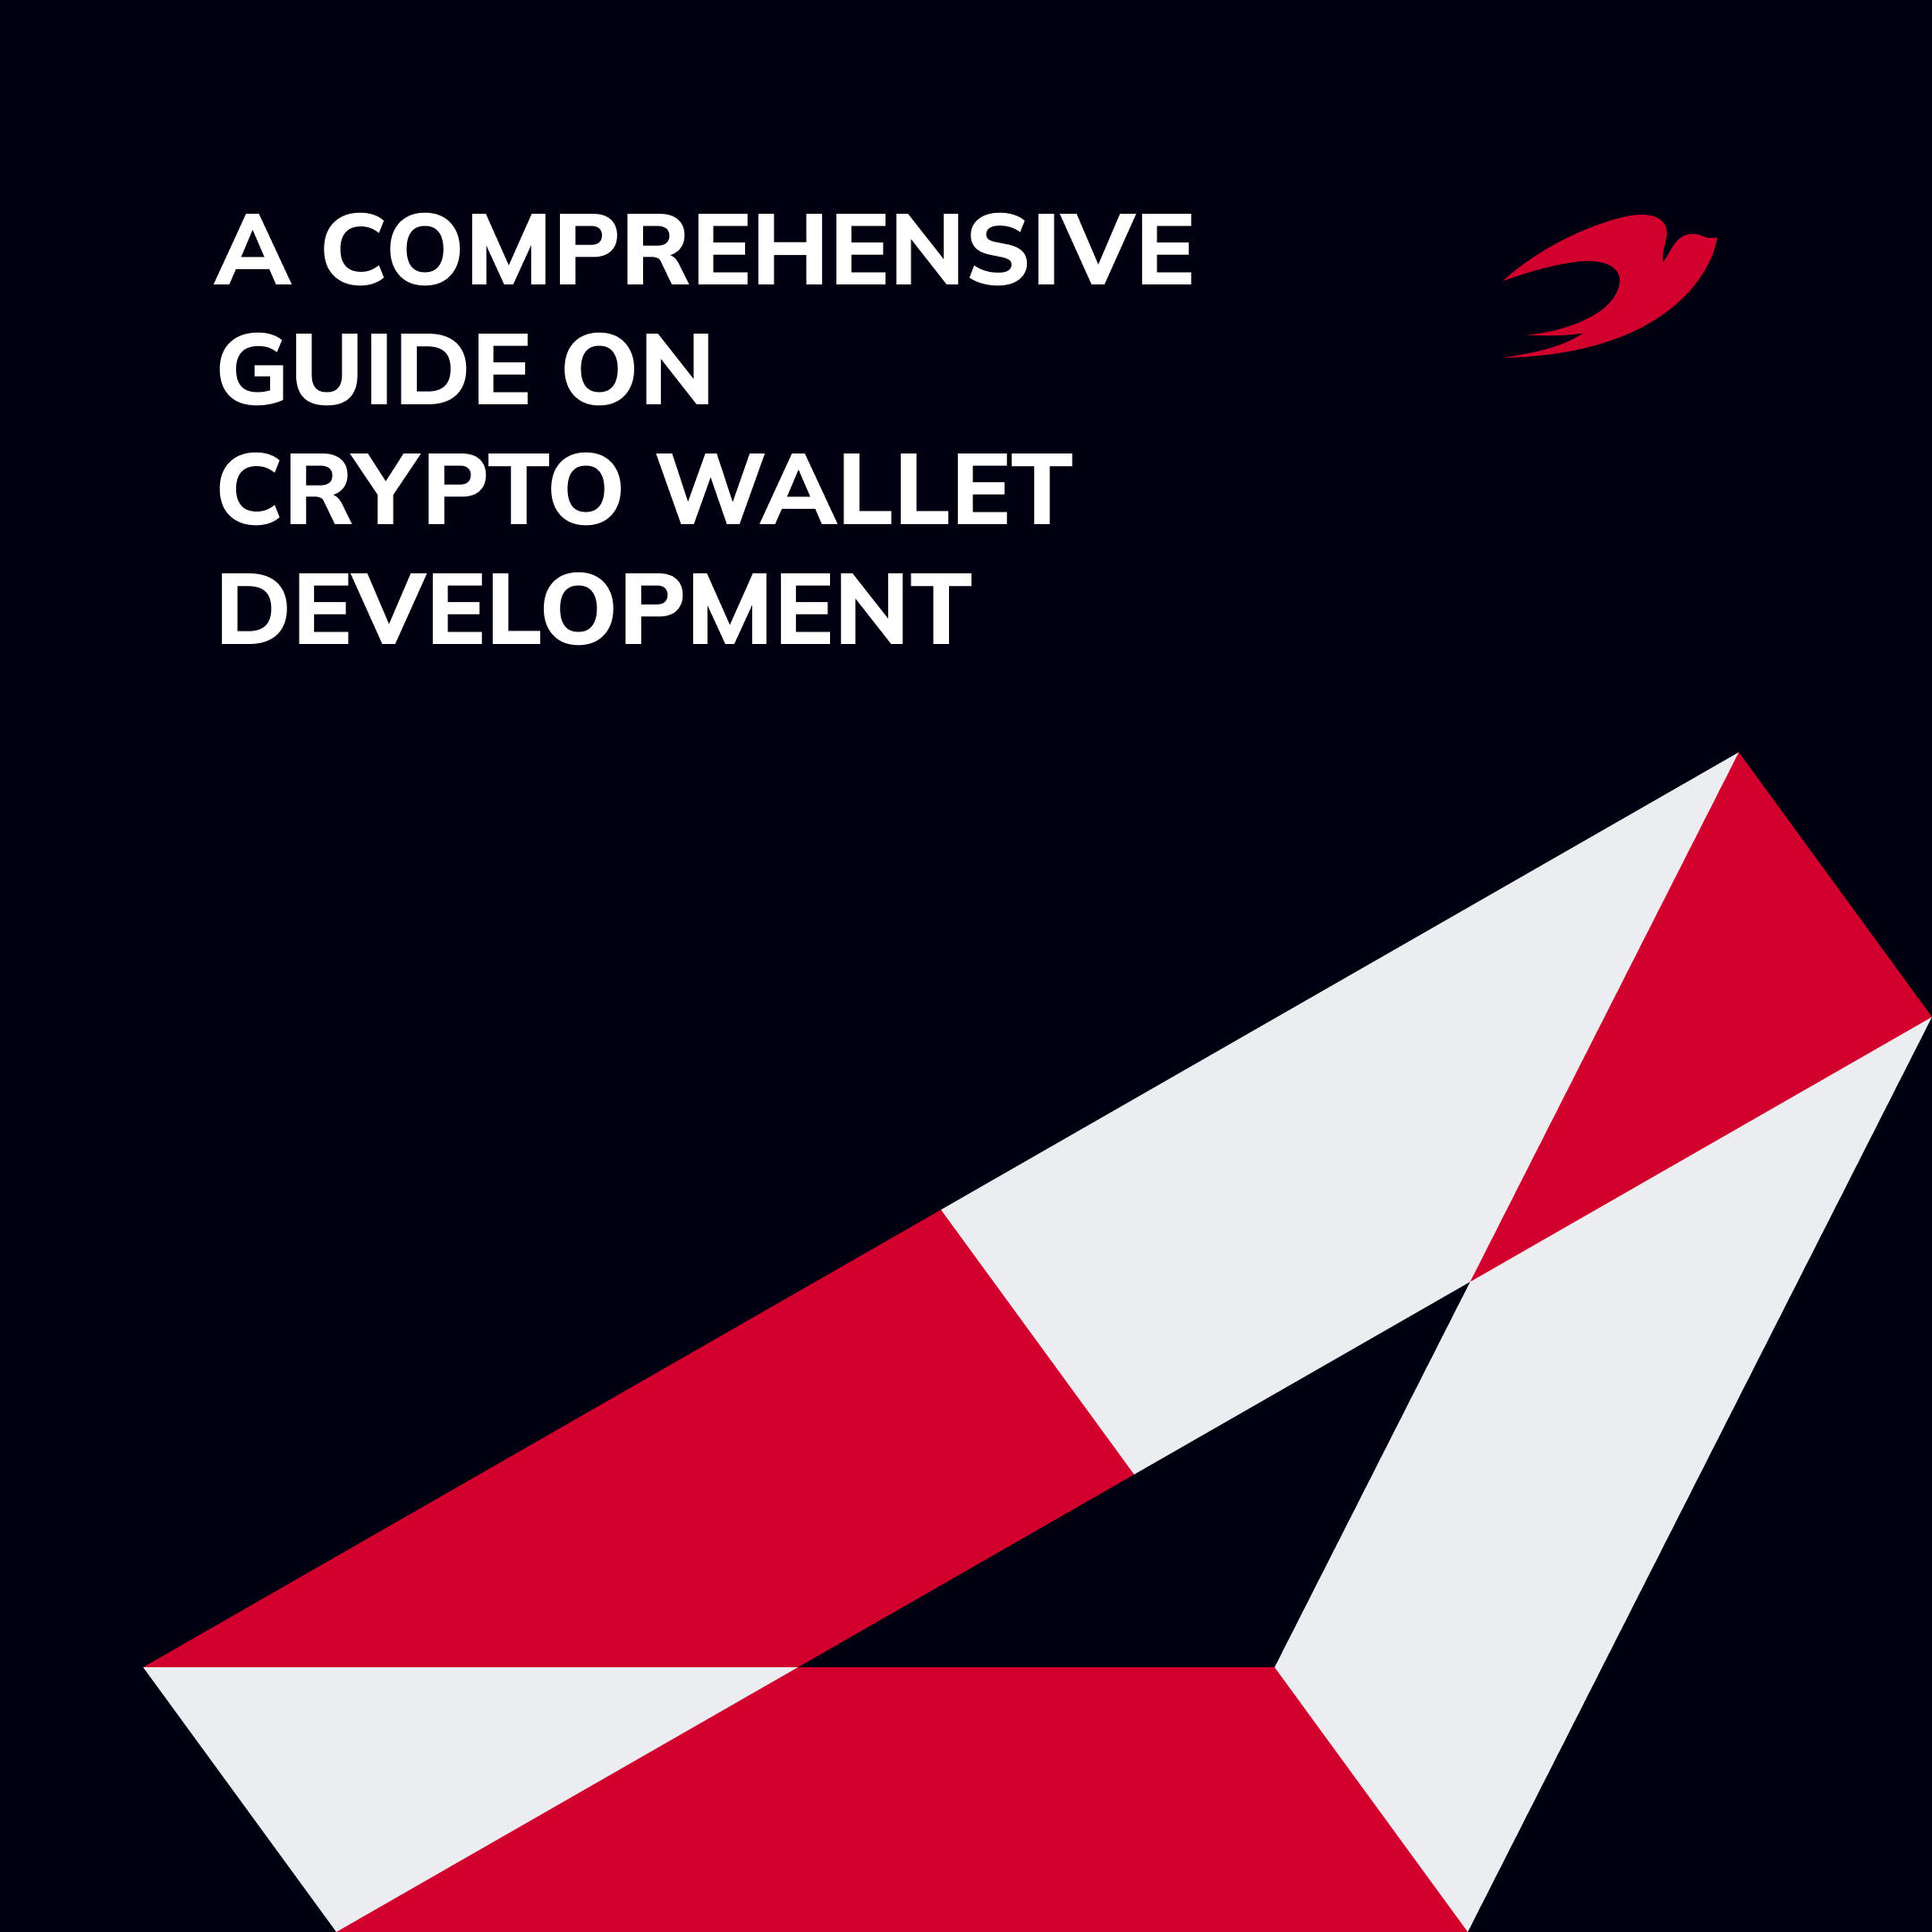 A Comprehensive Guide on Cryptocurrency Wallet Development